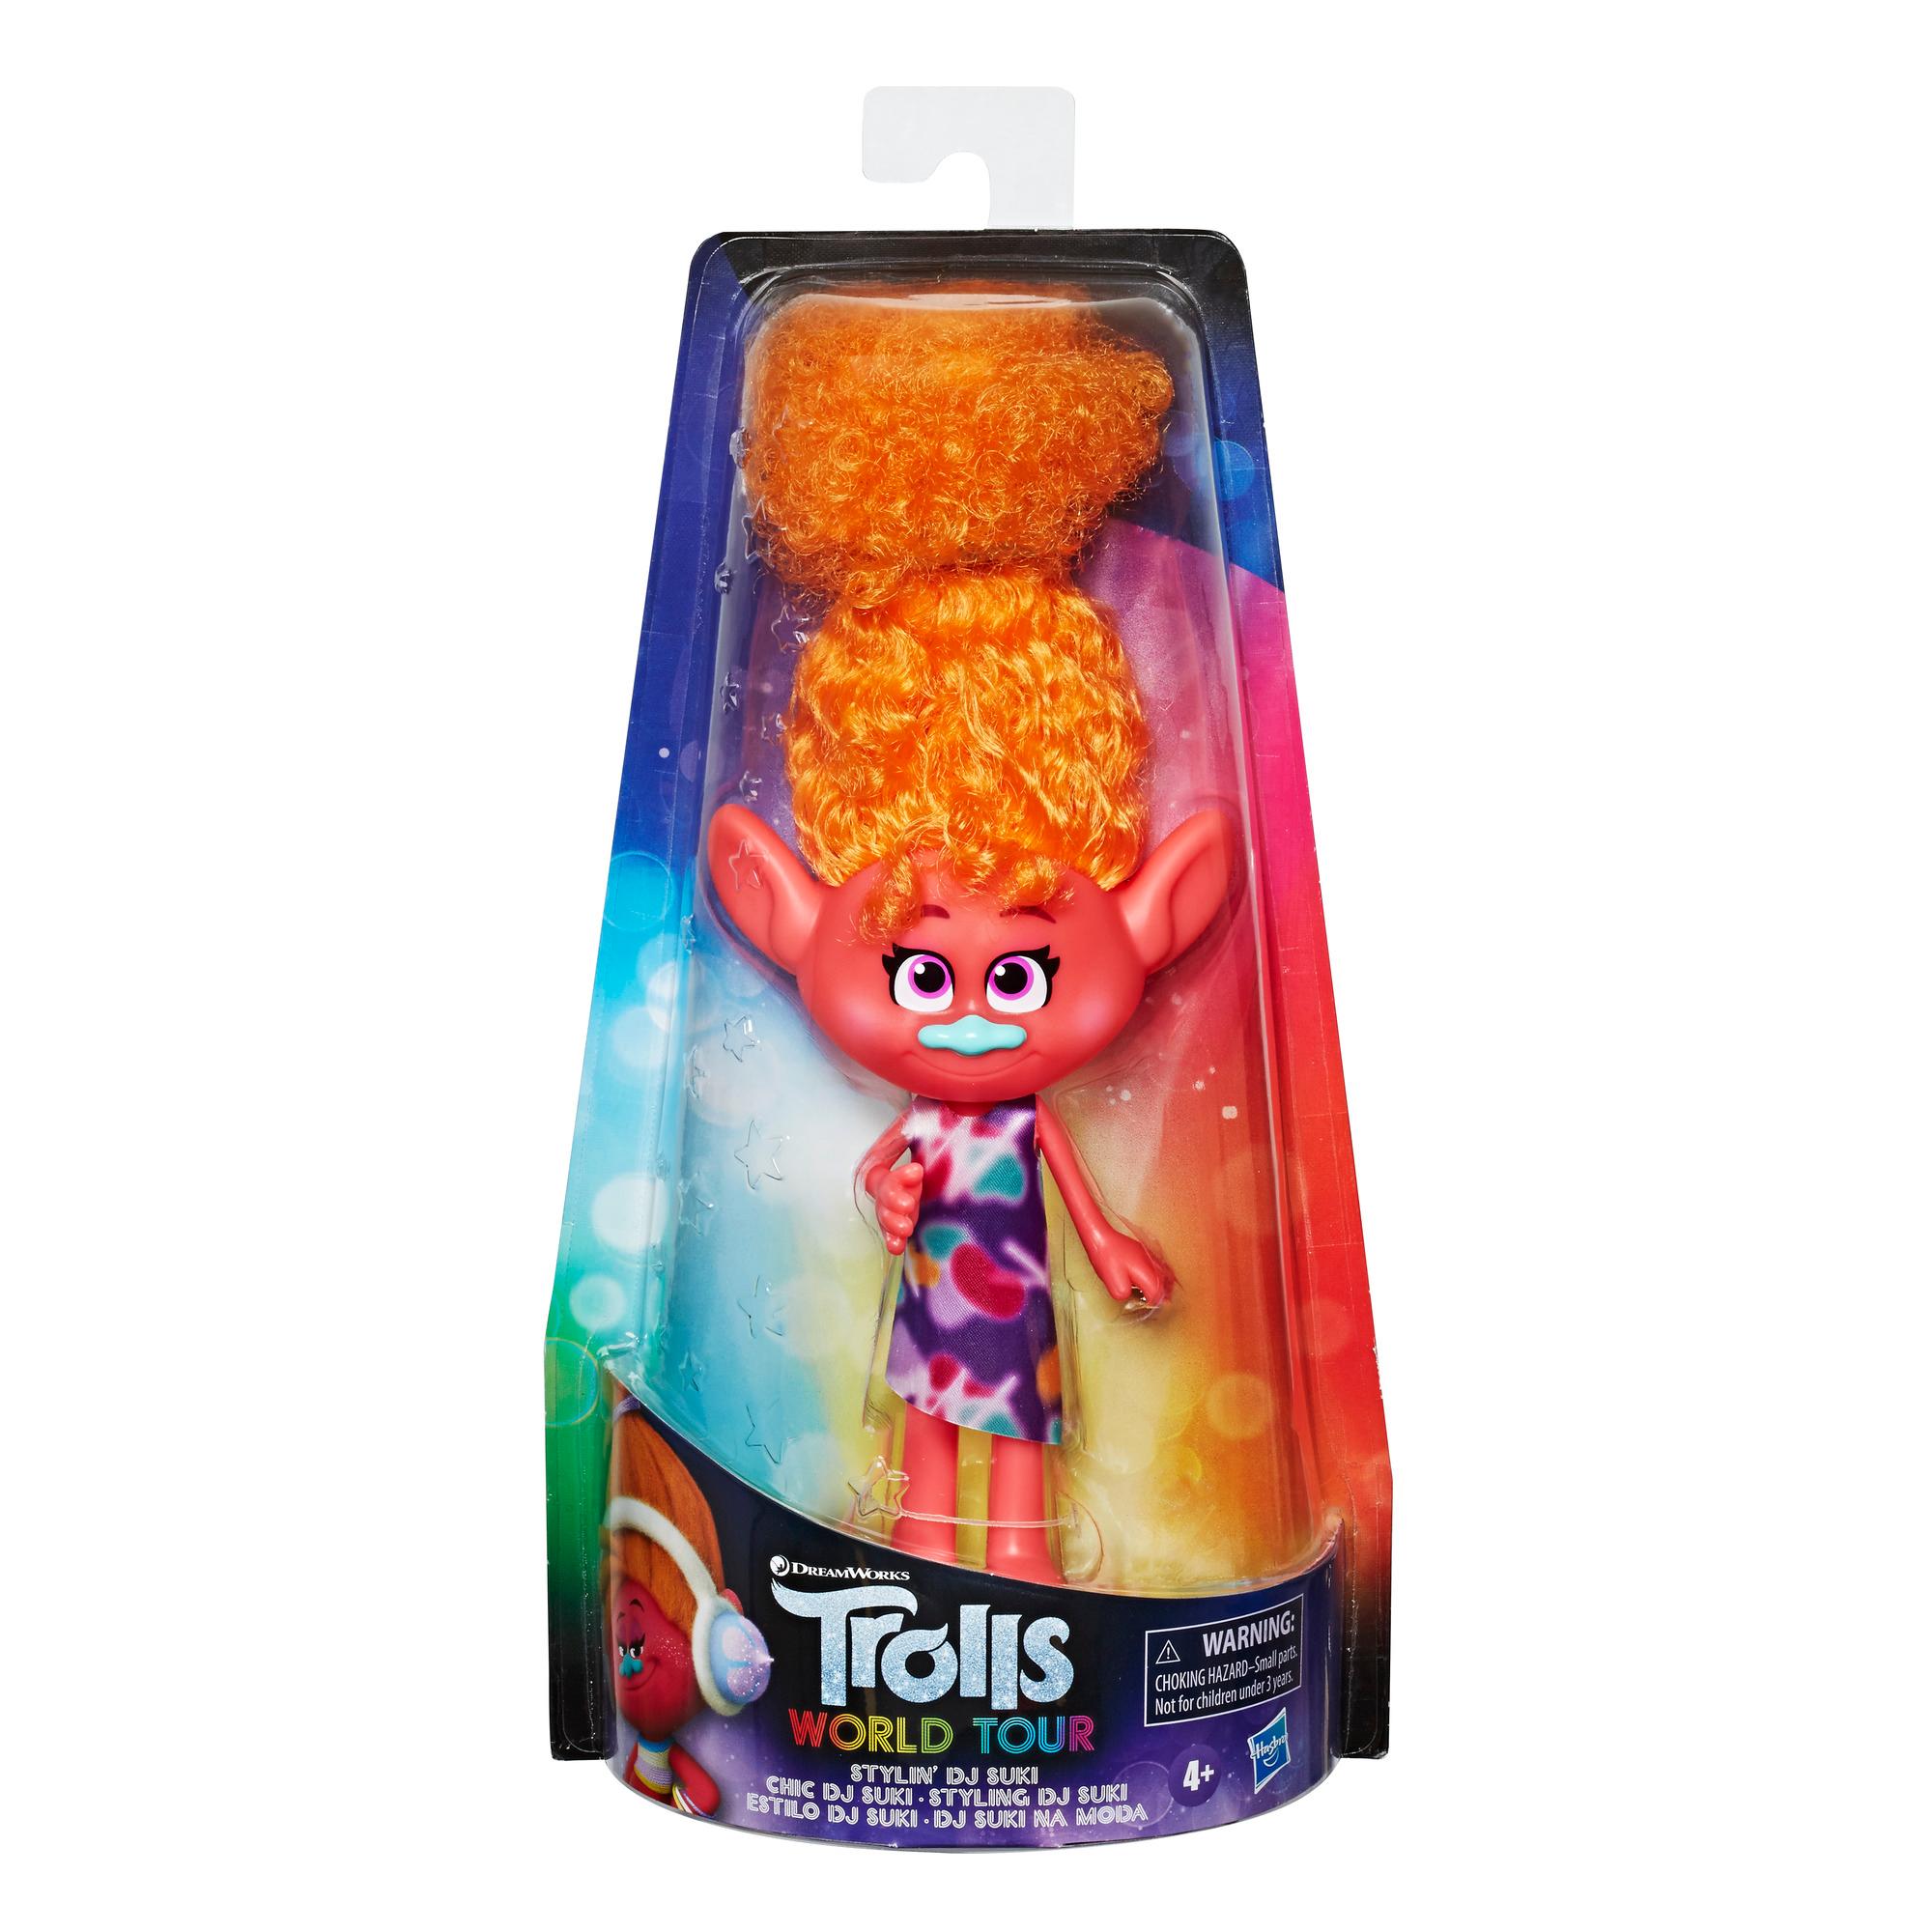 DreamWorks Trolls Stylin' DJ Suki Fashion Doll with Removable Dress and Hair Accessory, Inspired by Trolls World Tour